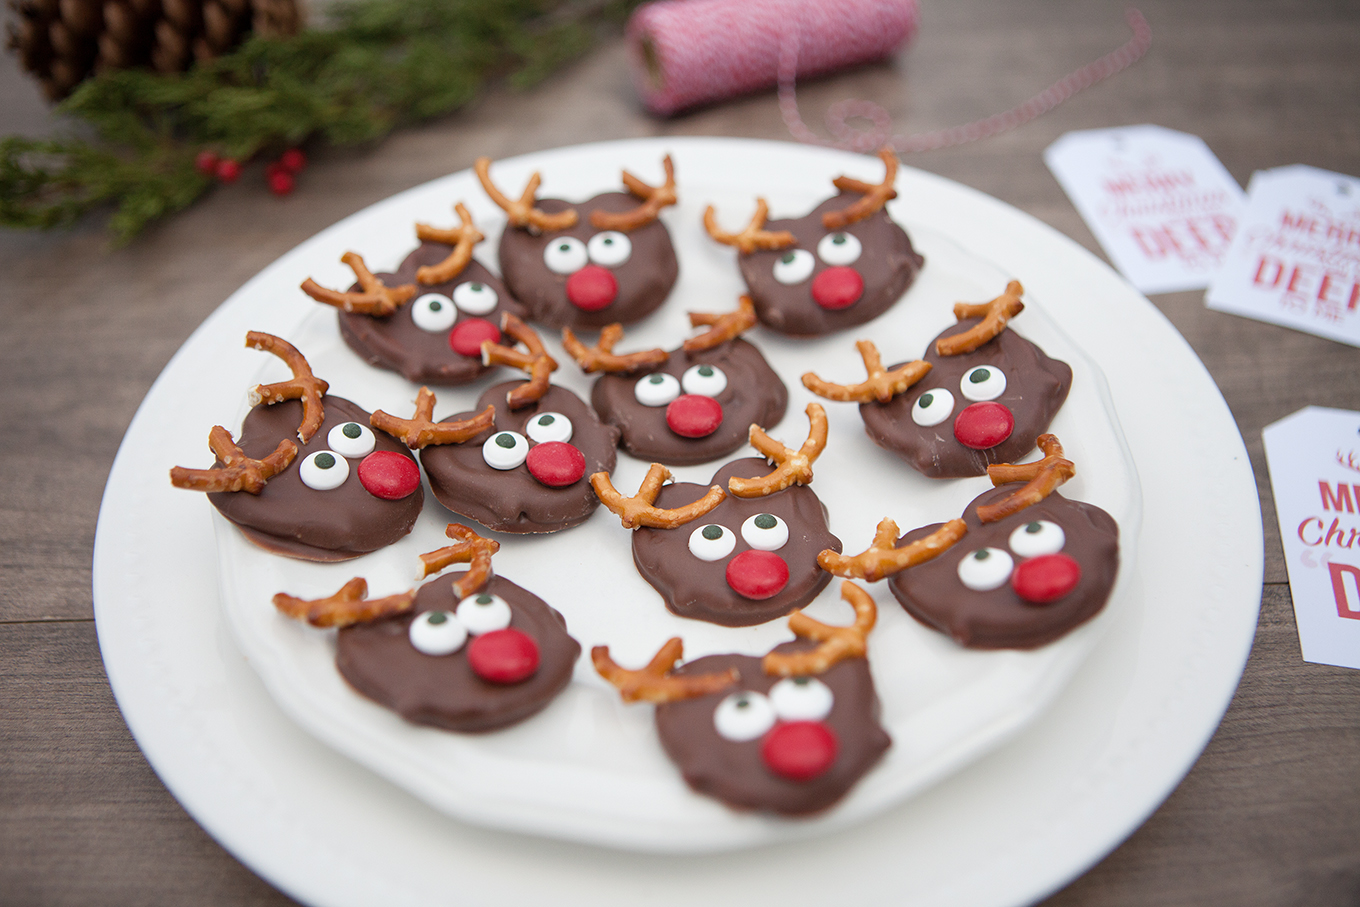 A cute and delicious treat to make with the kids this holiday season, these chocolate covered reindeer pretzels can be put together in no time at all!